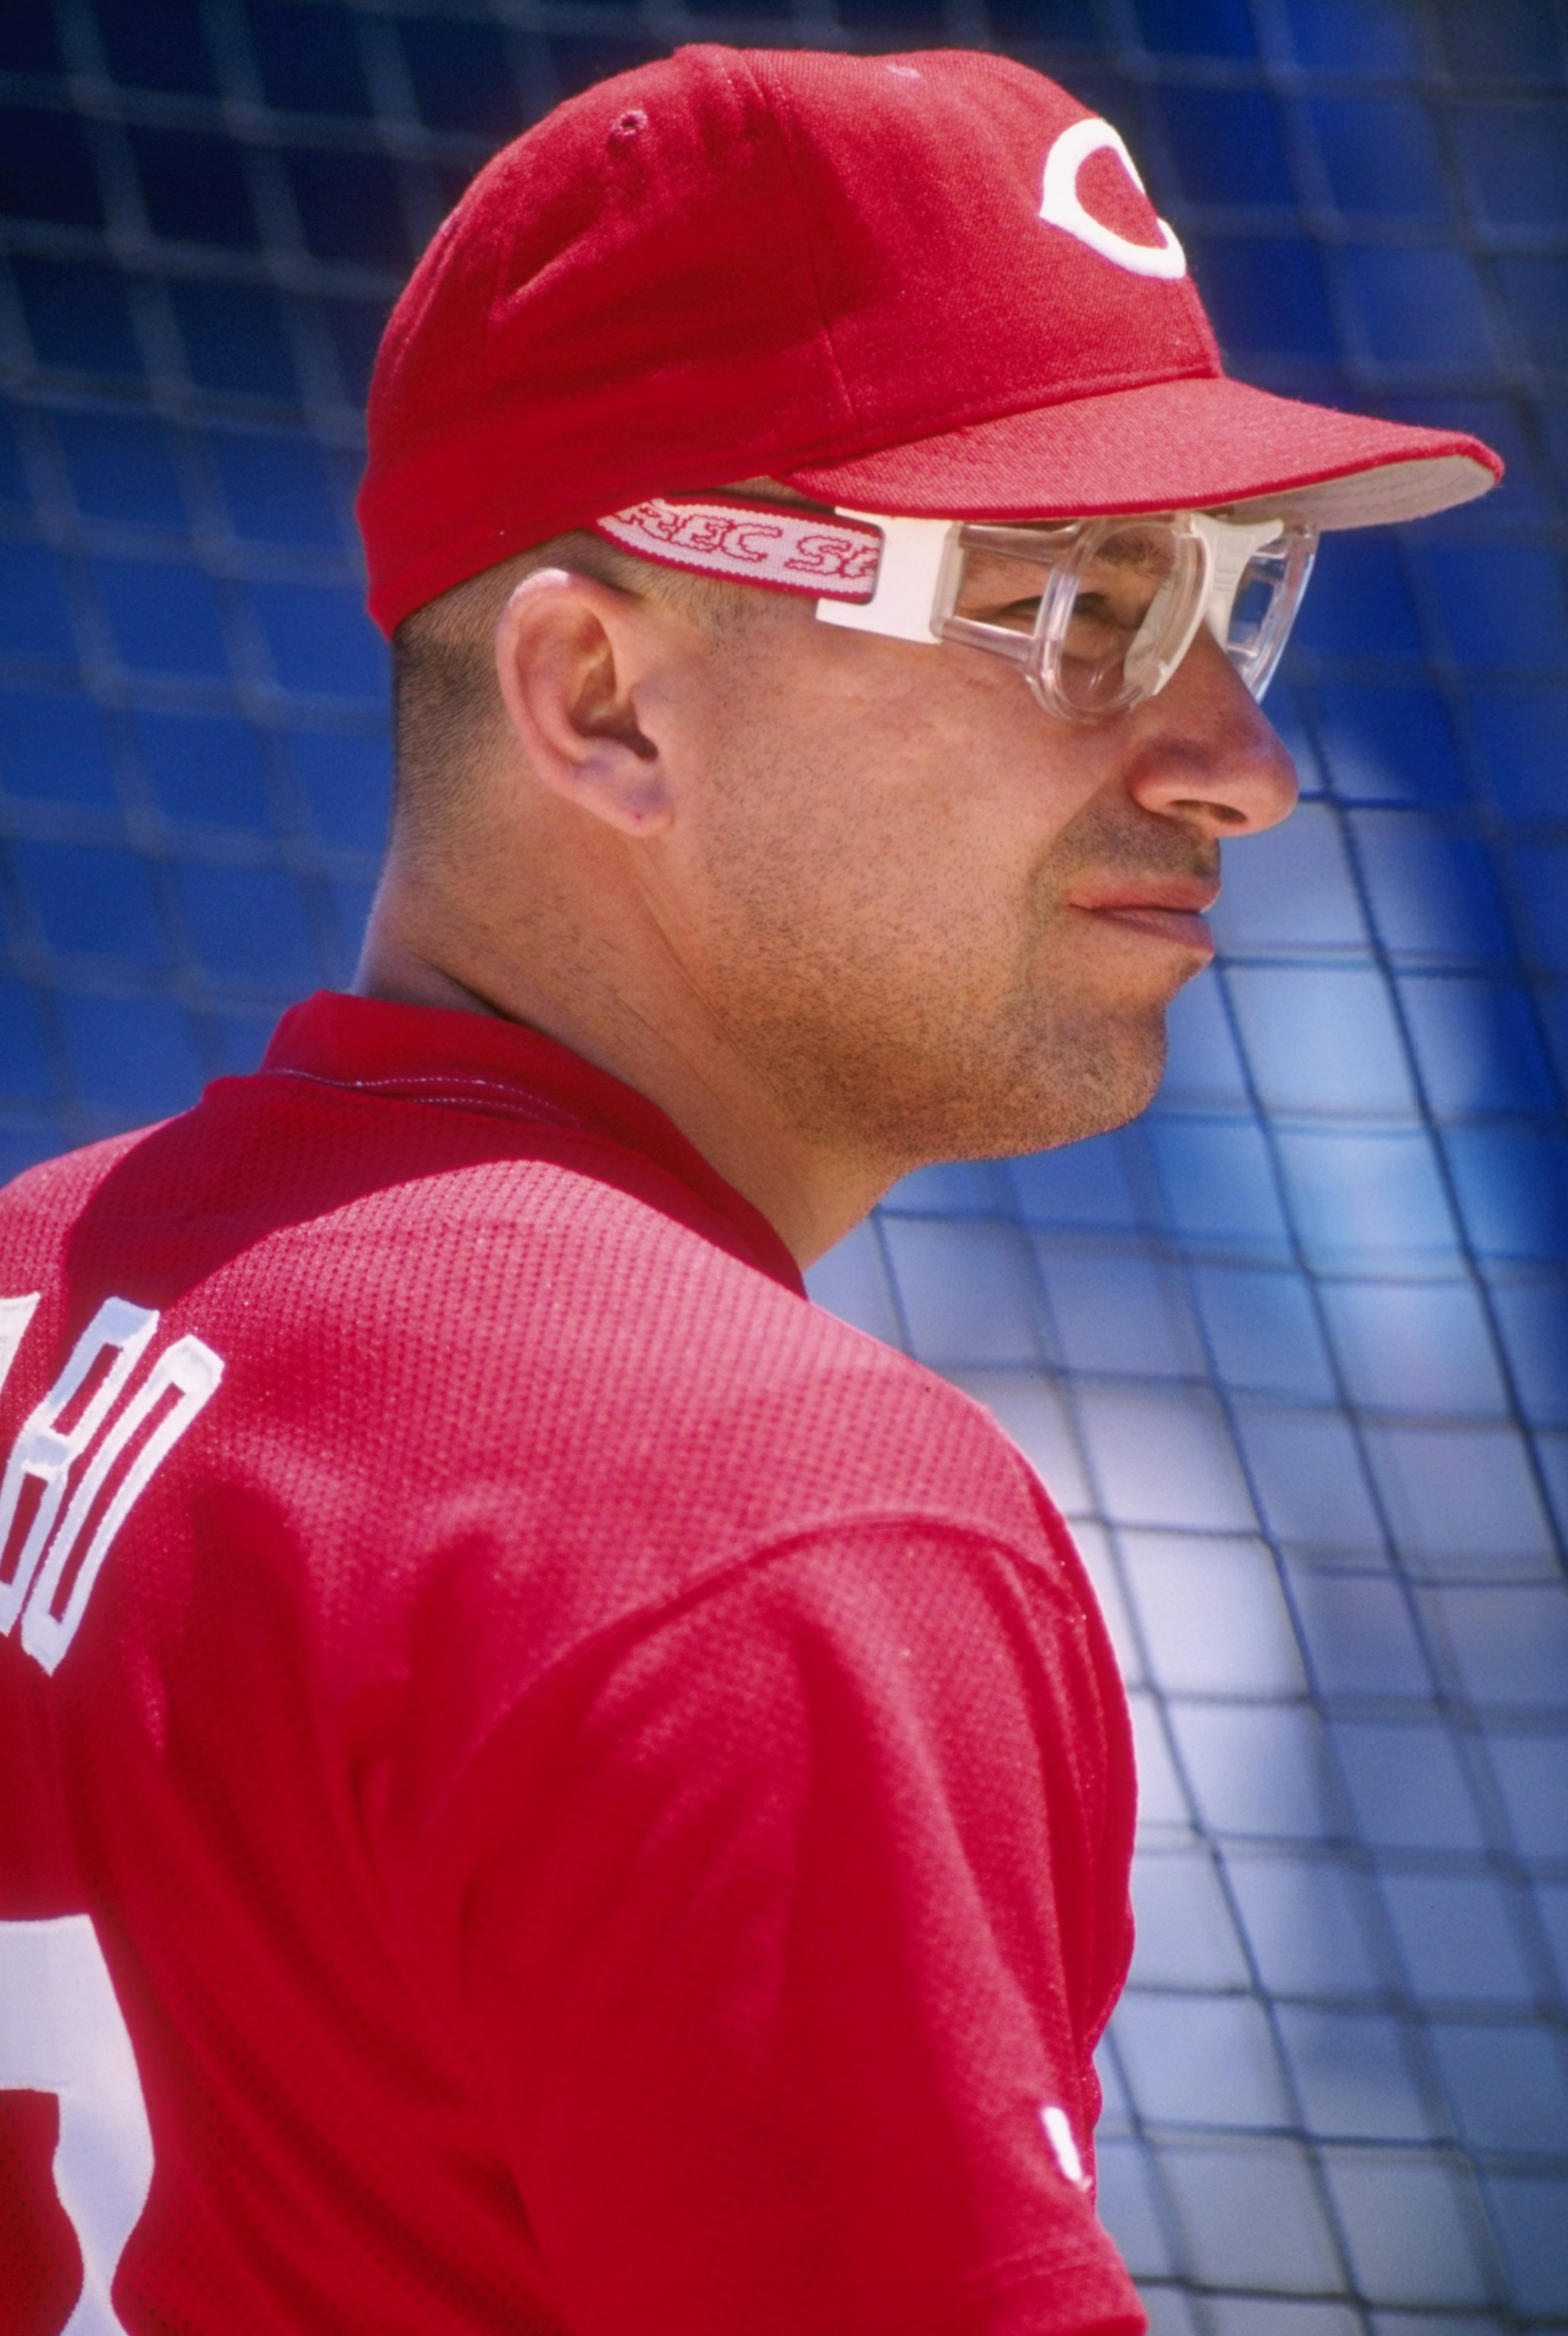 5 Jul 1996: Third baseman Chris Sabo of the Cincinnati Reds looks on from the batters box as he stands behind the protective netting during team batting practice before the Reds 3-0 victory over the Chicago Cubs at Wrigley Field in Chicago, Illinois.